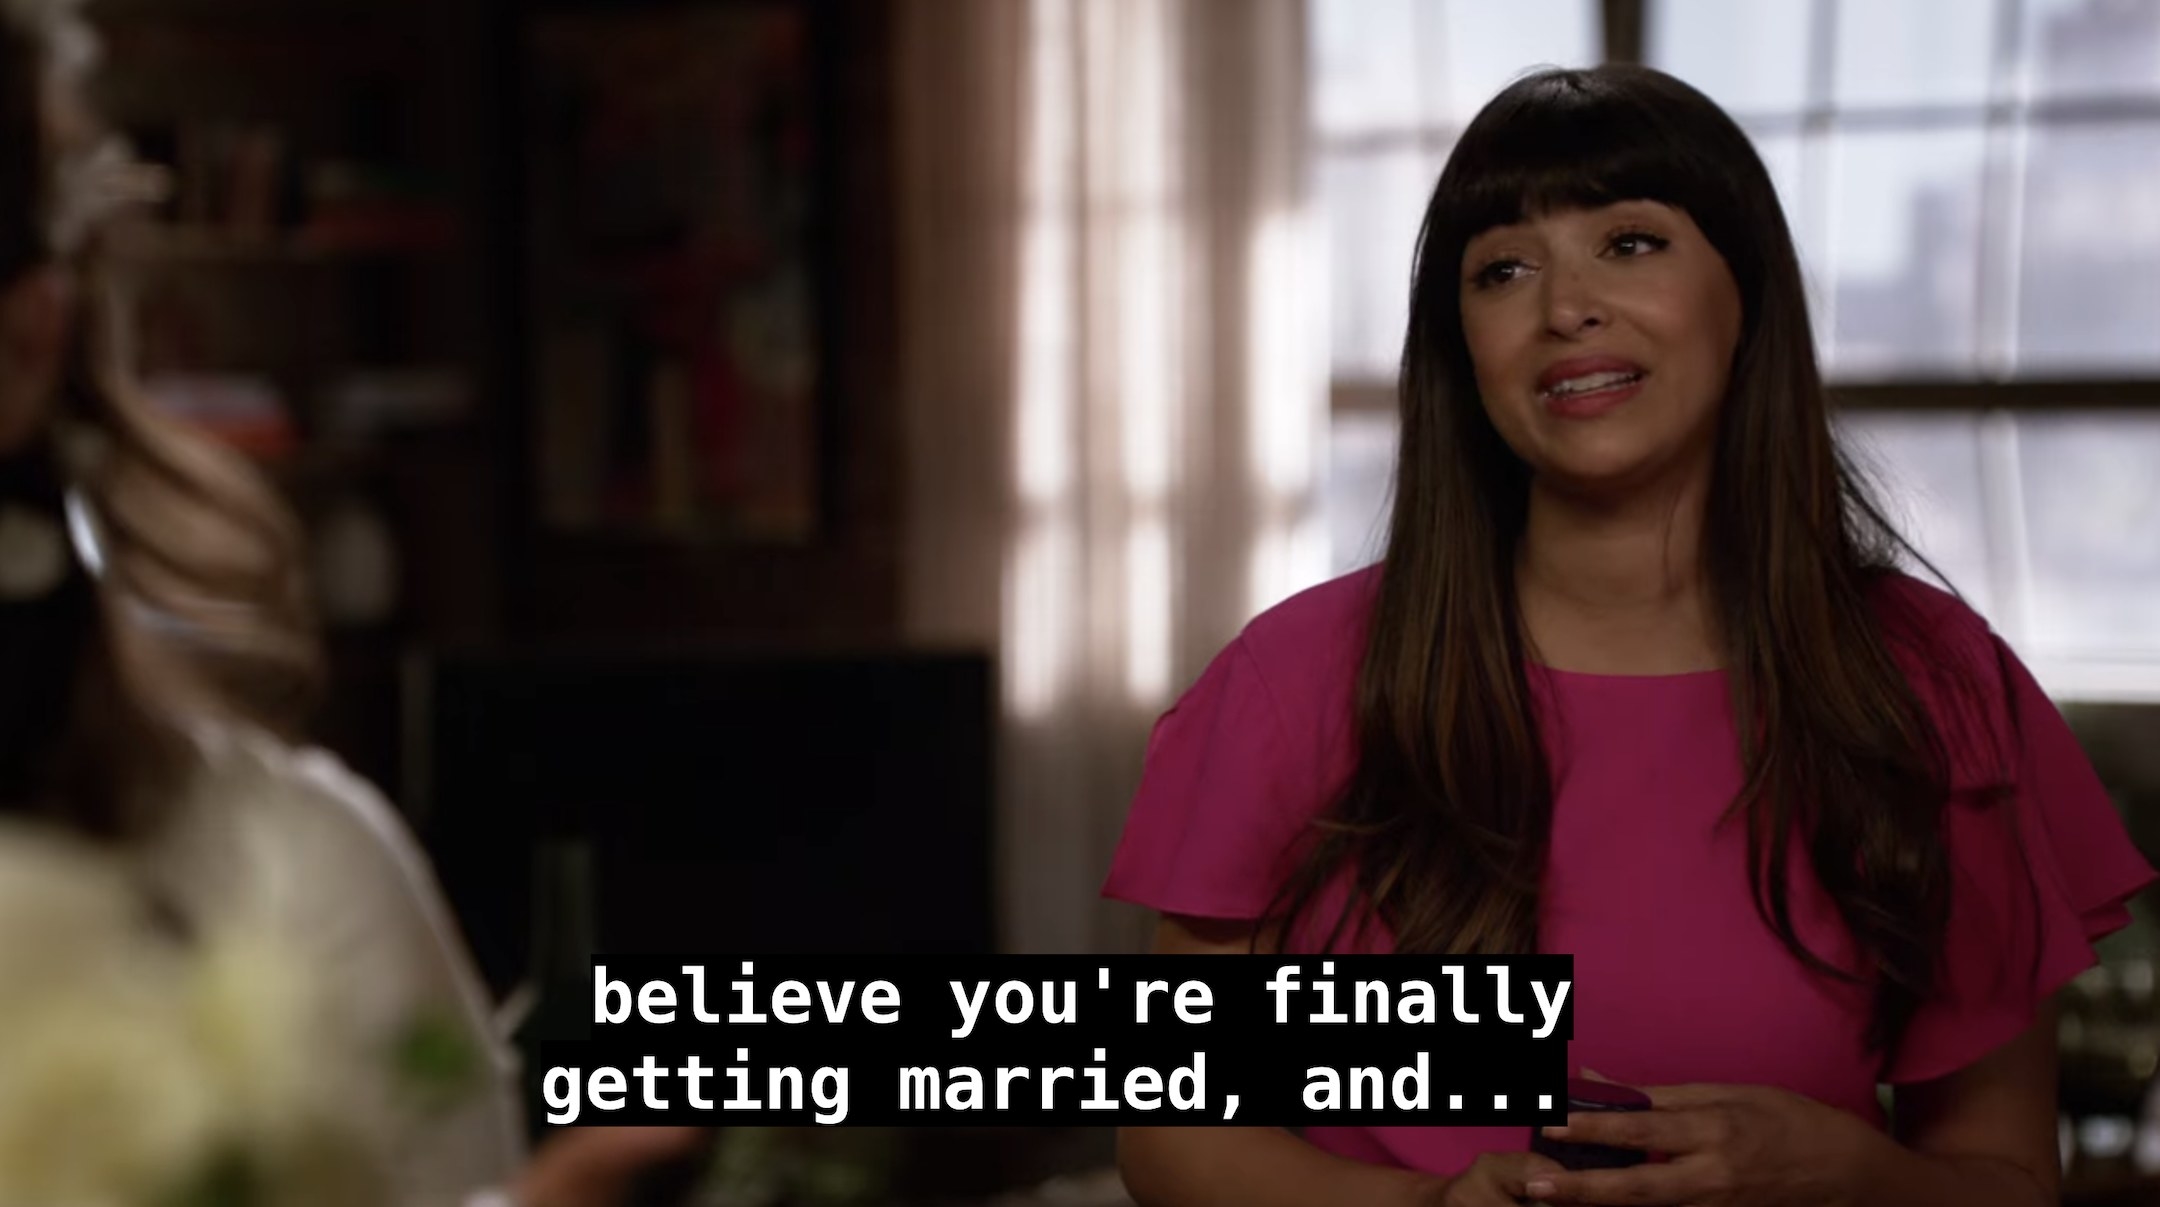 Cece finishes her sentence, believe youre finally getting married